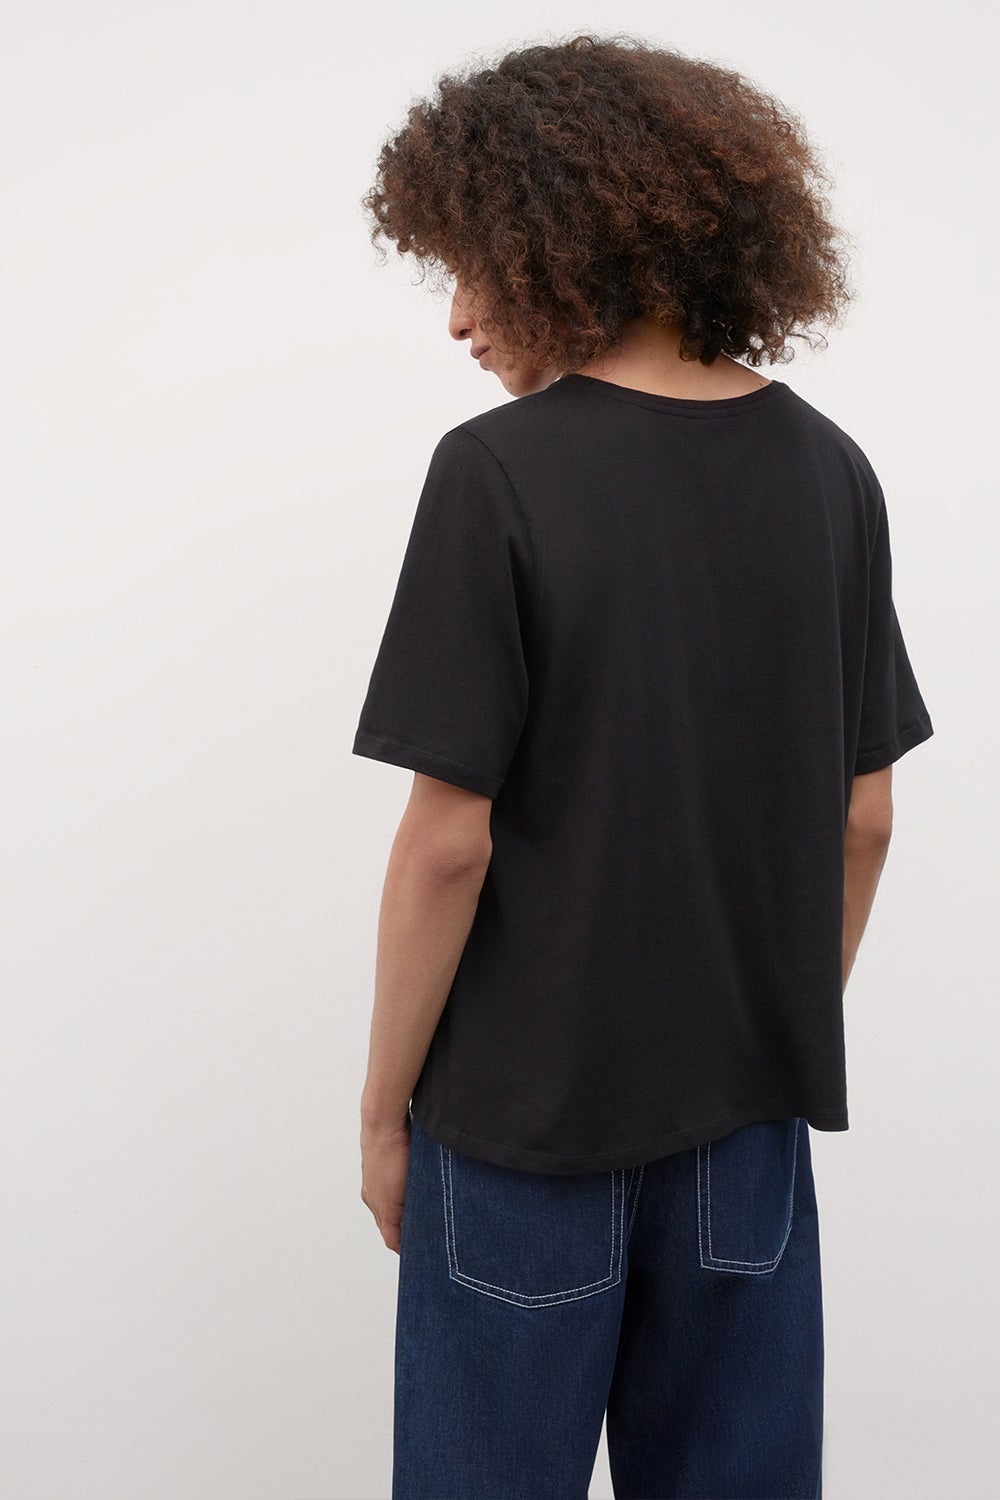 Kowtow Relaxed Tee Black